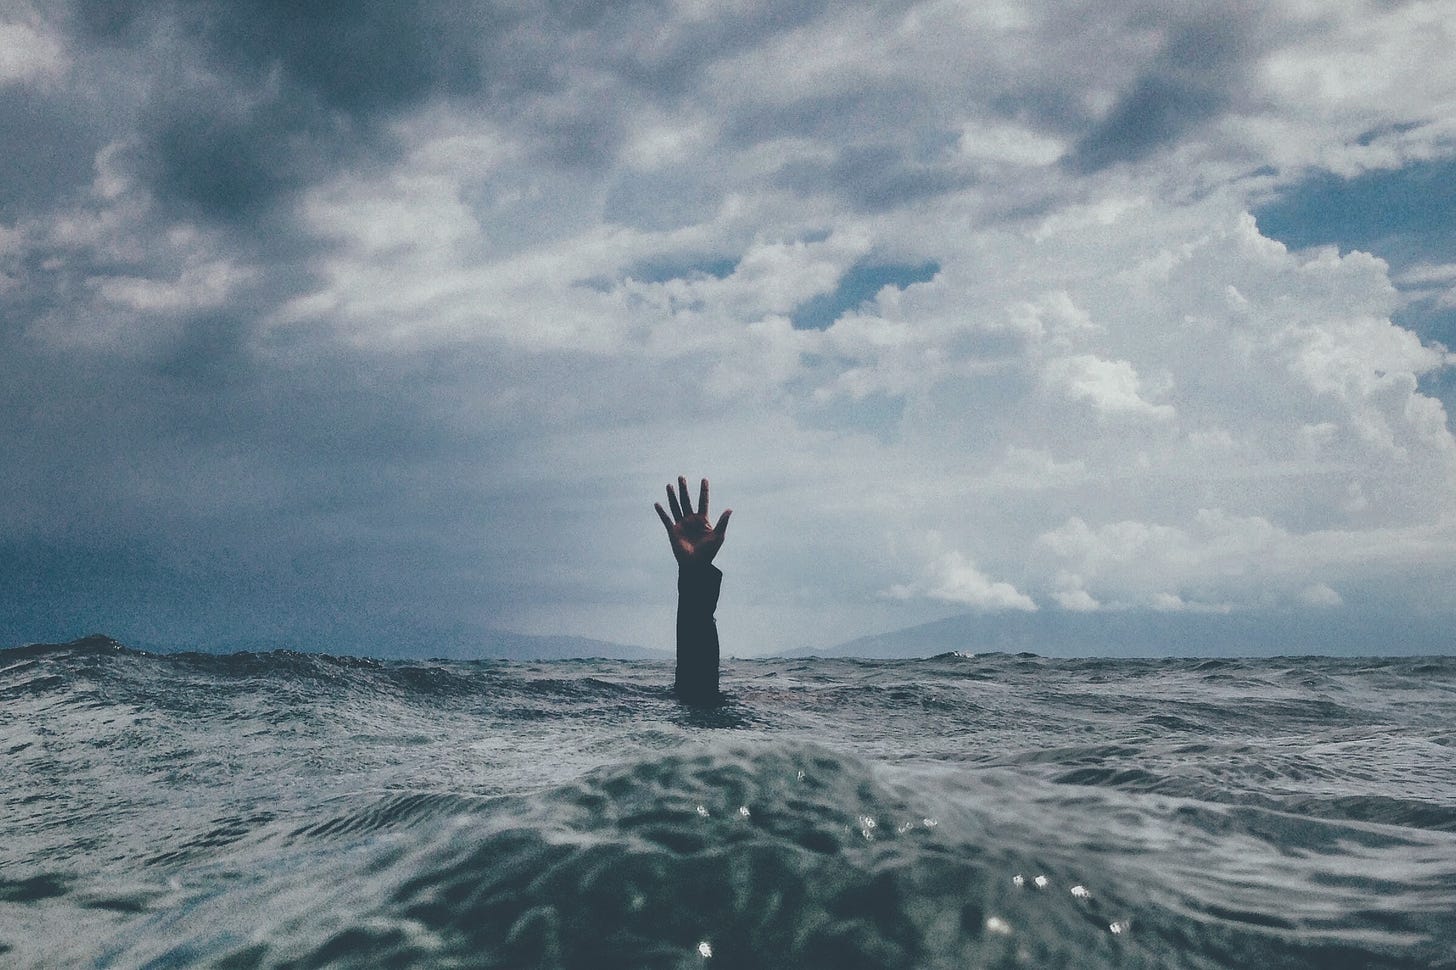 A person's hand sticks out of a churning sea. The hand and arm are visible up to the elbow. Above is a cloudy, dark sky.